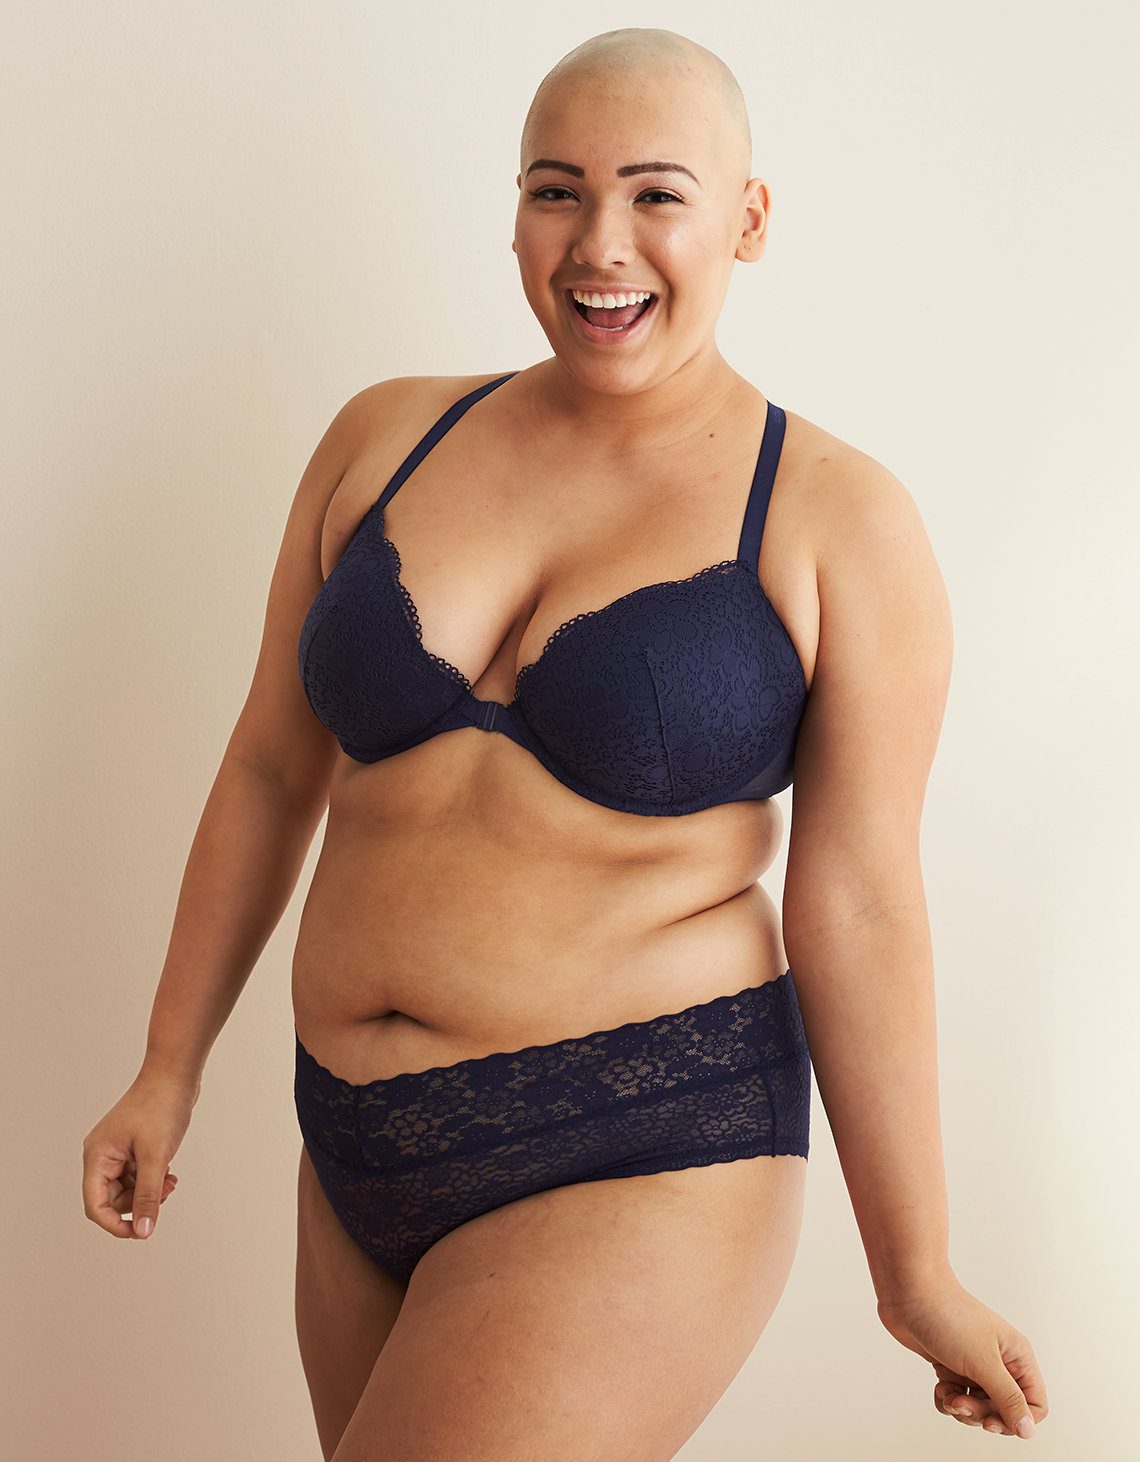 You Need to See Aeries Latest Lingerie Campaign - FabFitFun